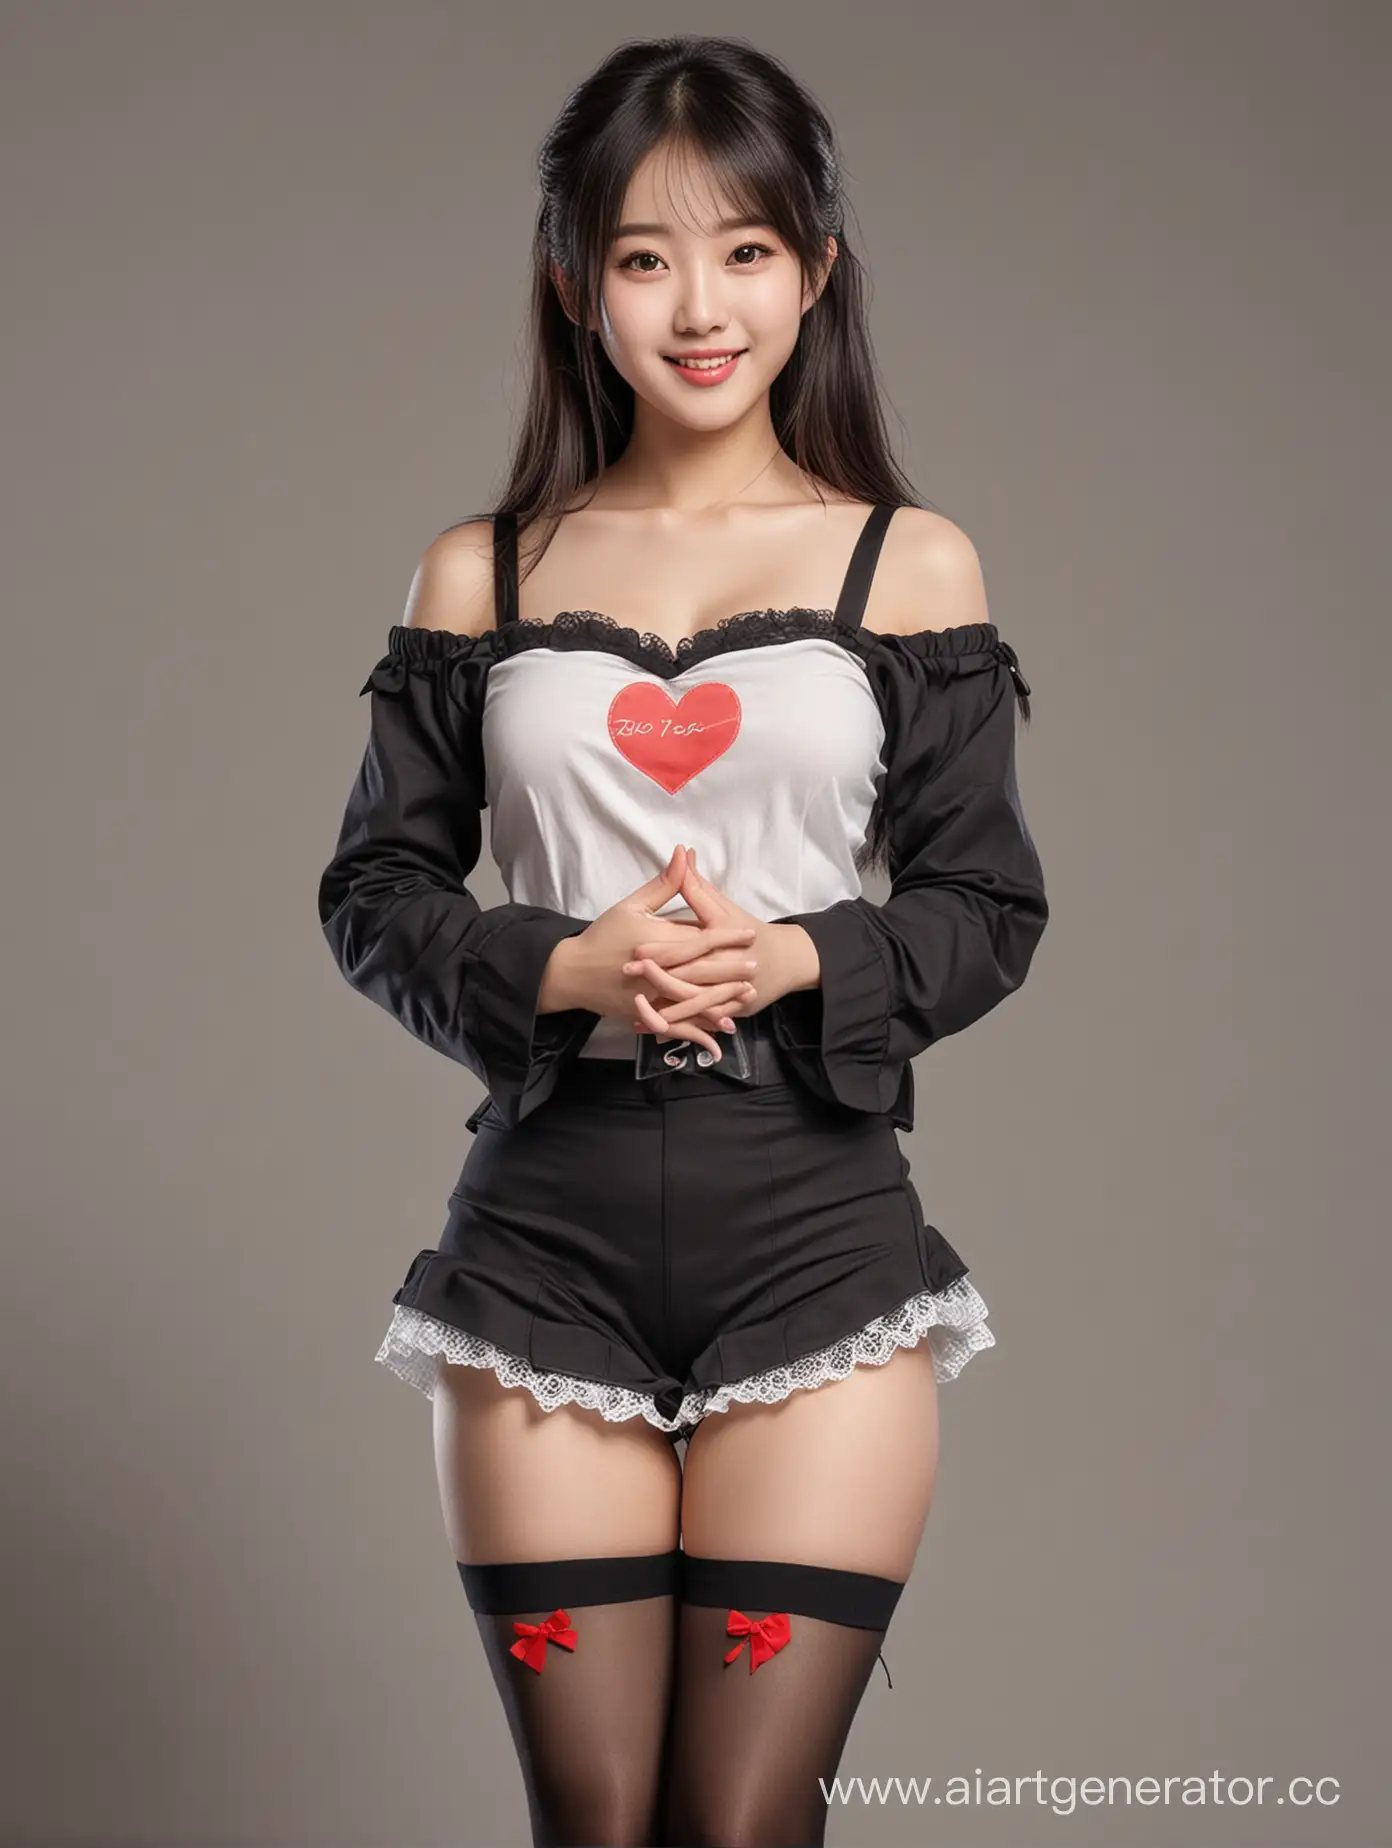 Adorable-East-Asian-Girl-in-Black-Stockings-with-HeartShaped-Hand-Gesture